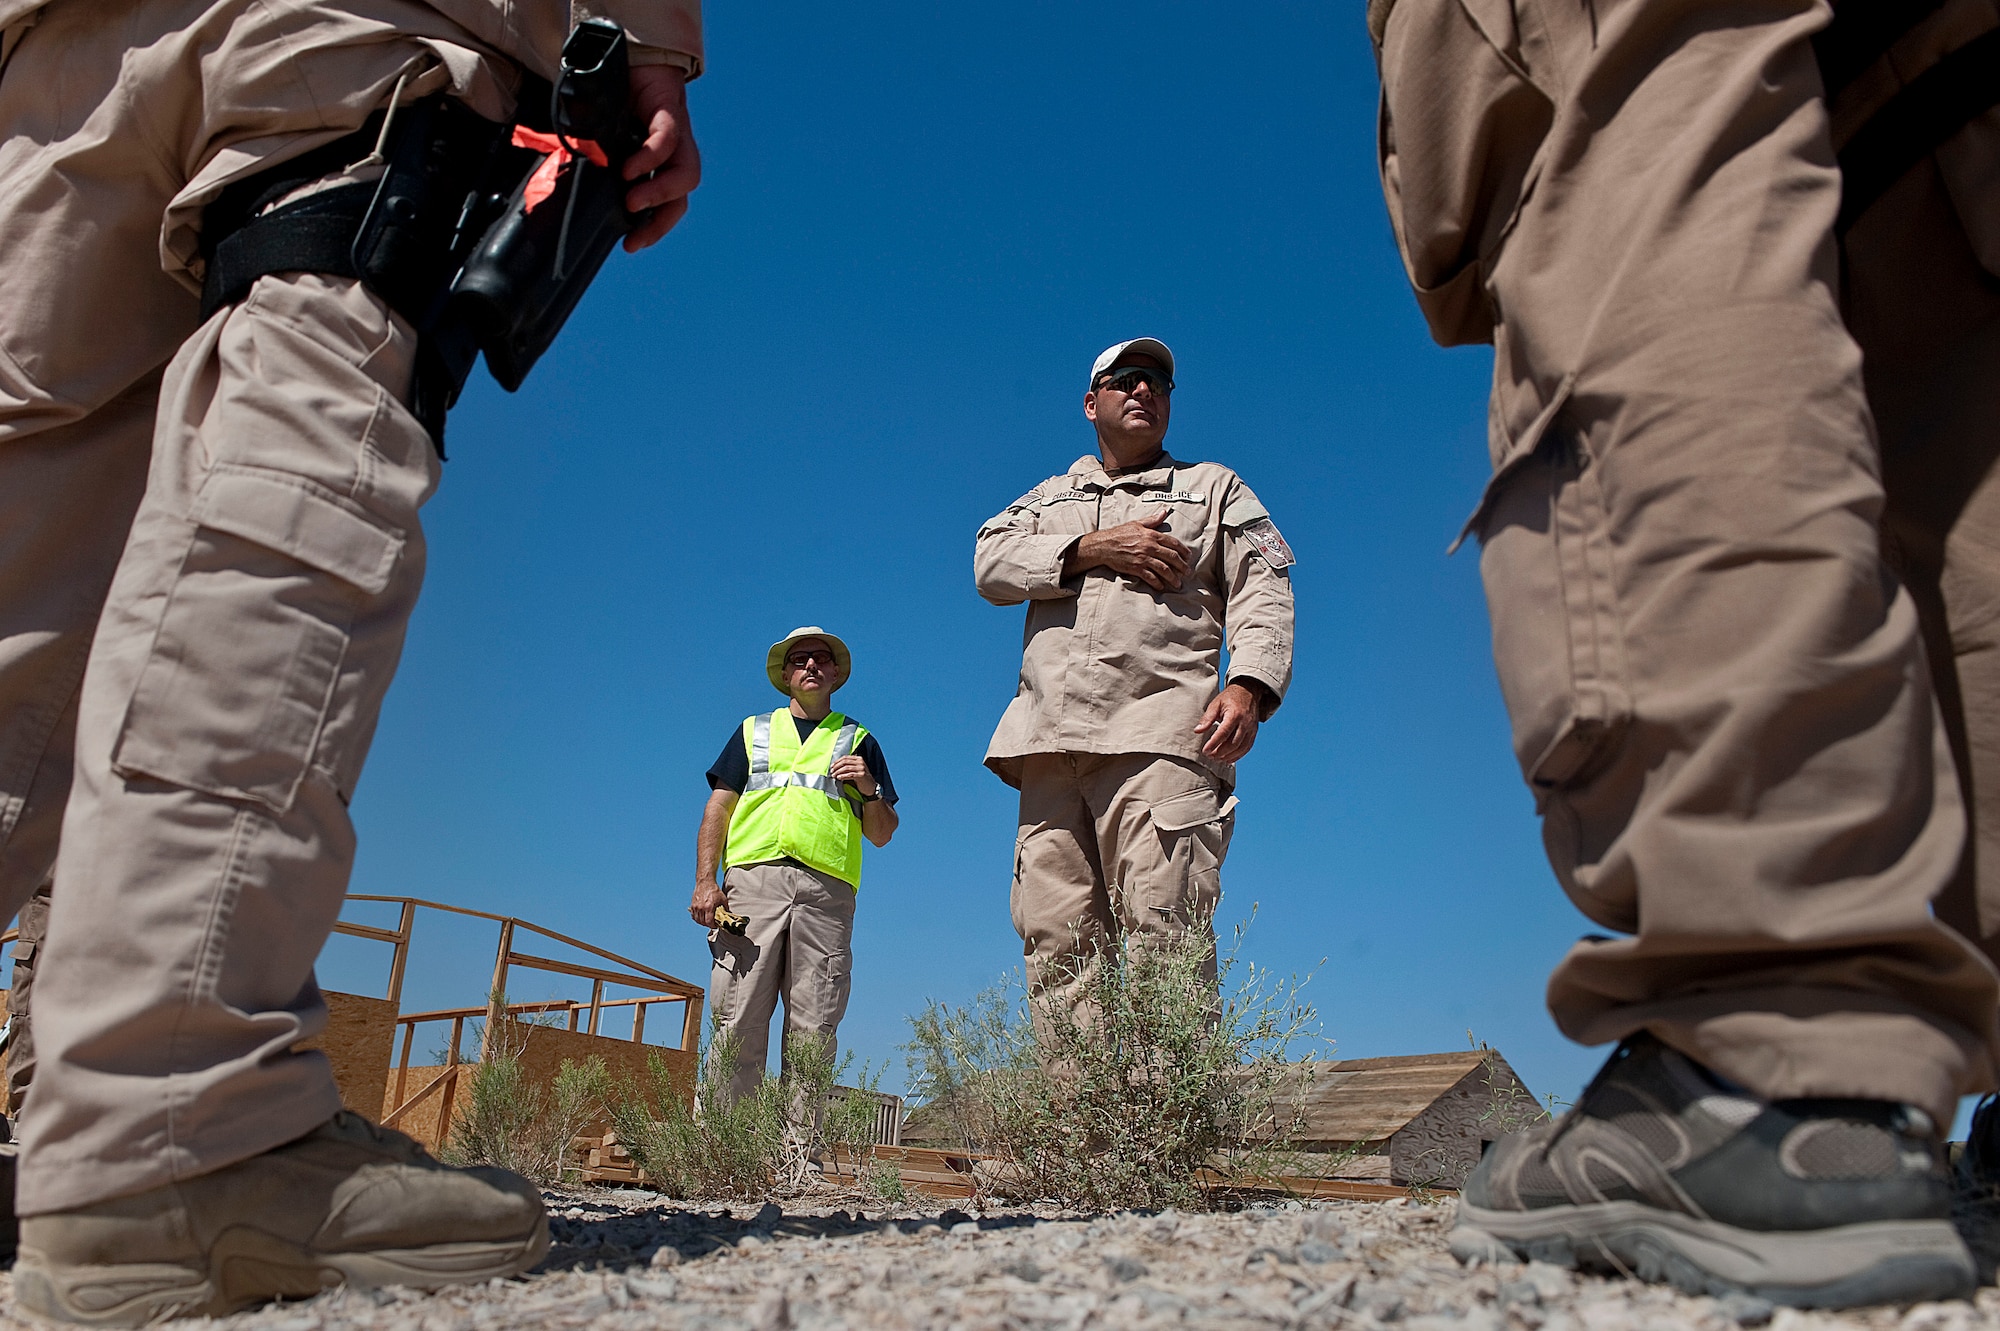 Marcus Custer, Homeland Security Investigations special agent, instructs other HSI special agents, during the Rapid Response Team Field Familiarization and Disaster Response Training exercise Sept. 20, 2012, at Nellis Air Force Base, Nev. HSI special agents chose Nellis AFB for the training location because of its ideal facilities, equipment, and military support, as well as its challenging terrain and climate. (U.S. Air Force photo by Staff Sgt. Christopher Hubenthal)
